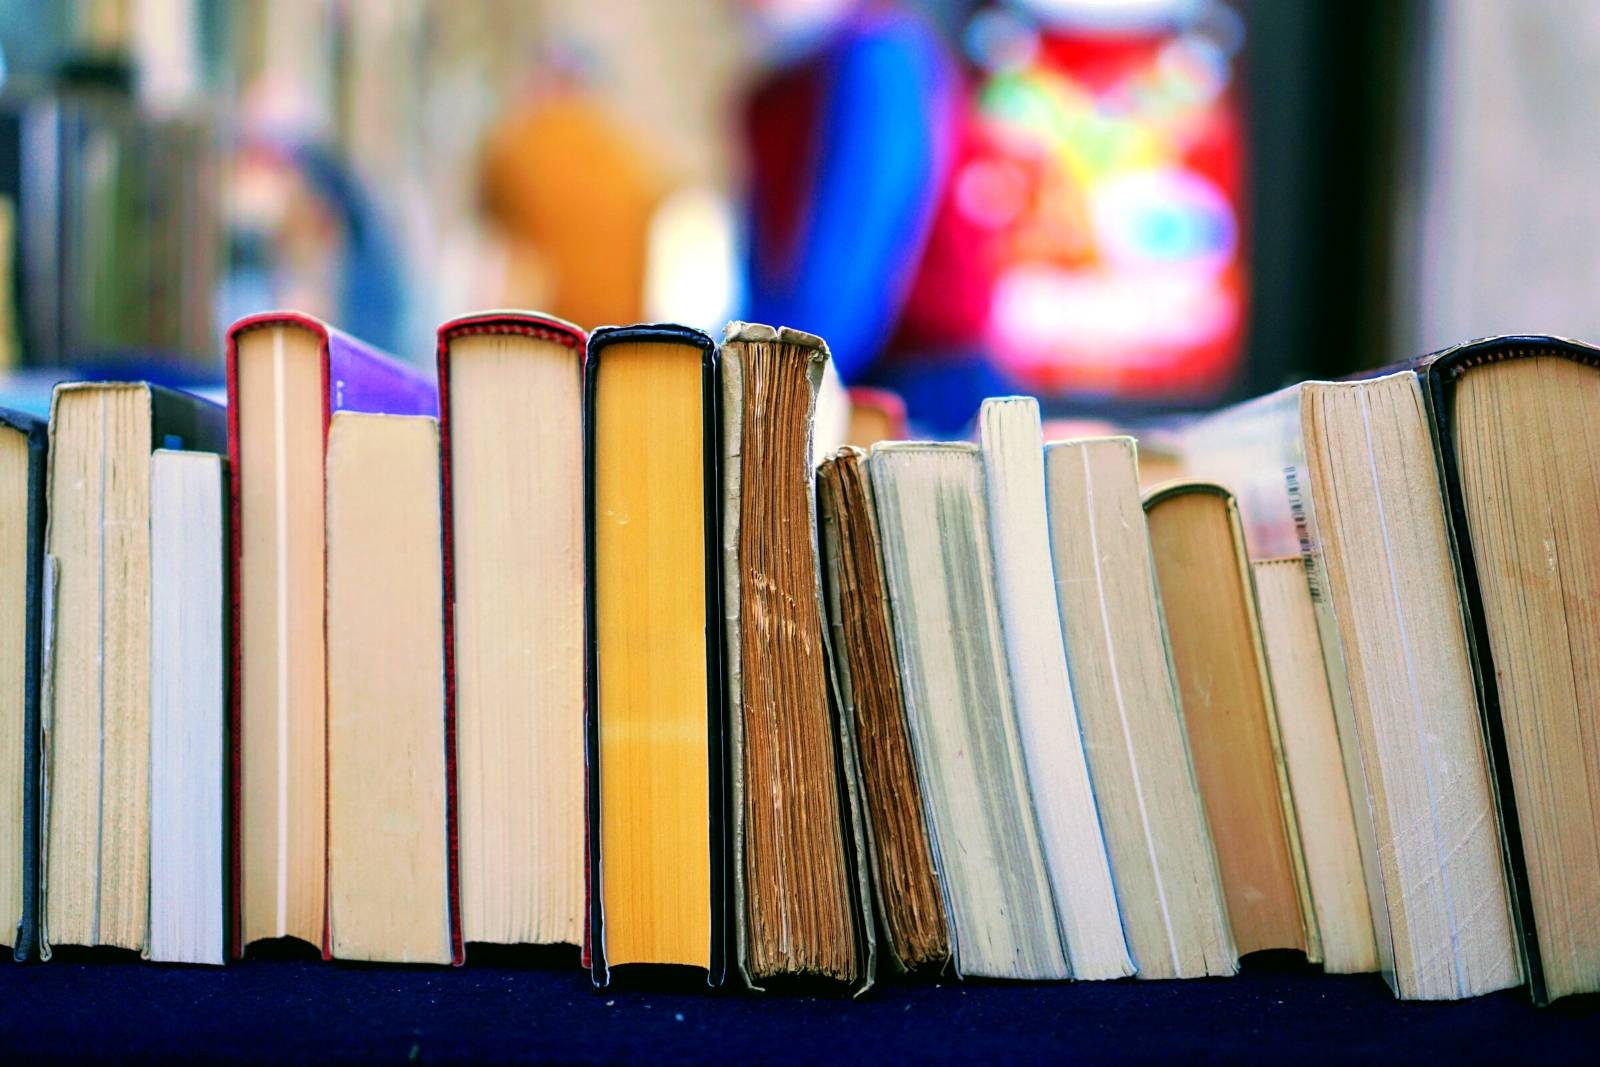 Job Searcher Should Read these 4 Classic Books